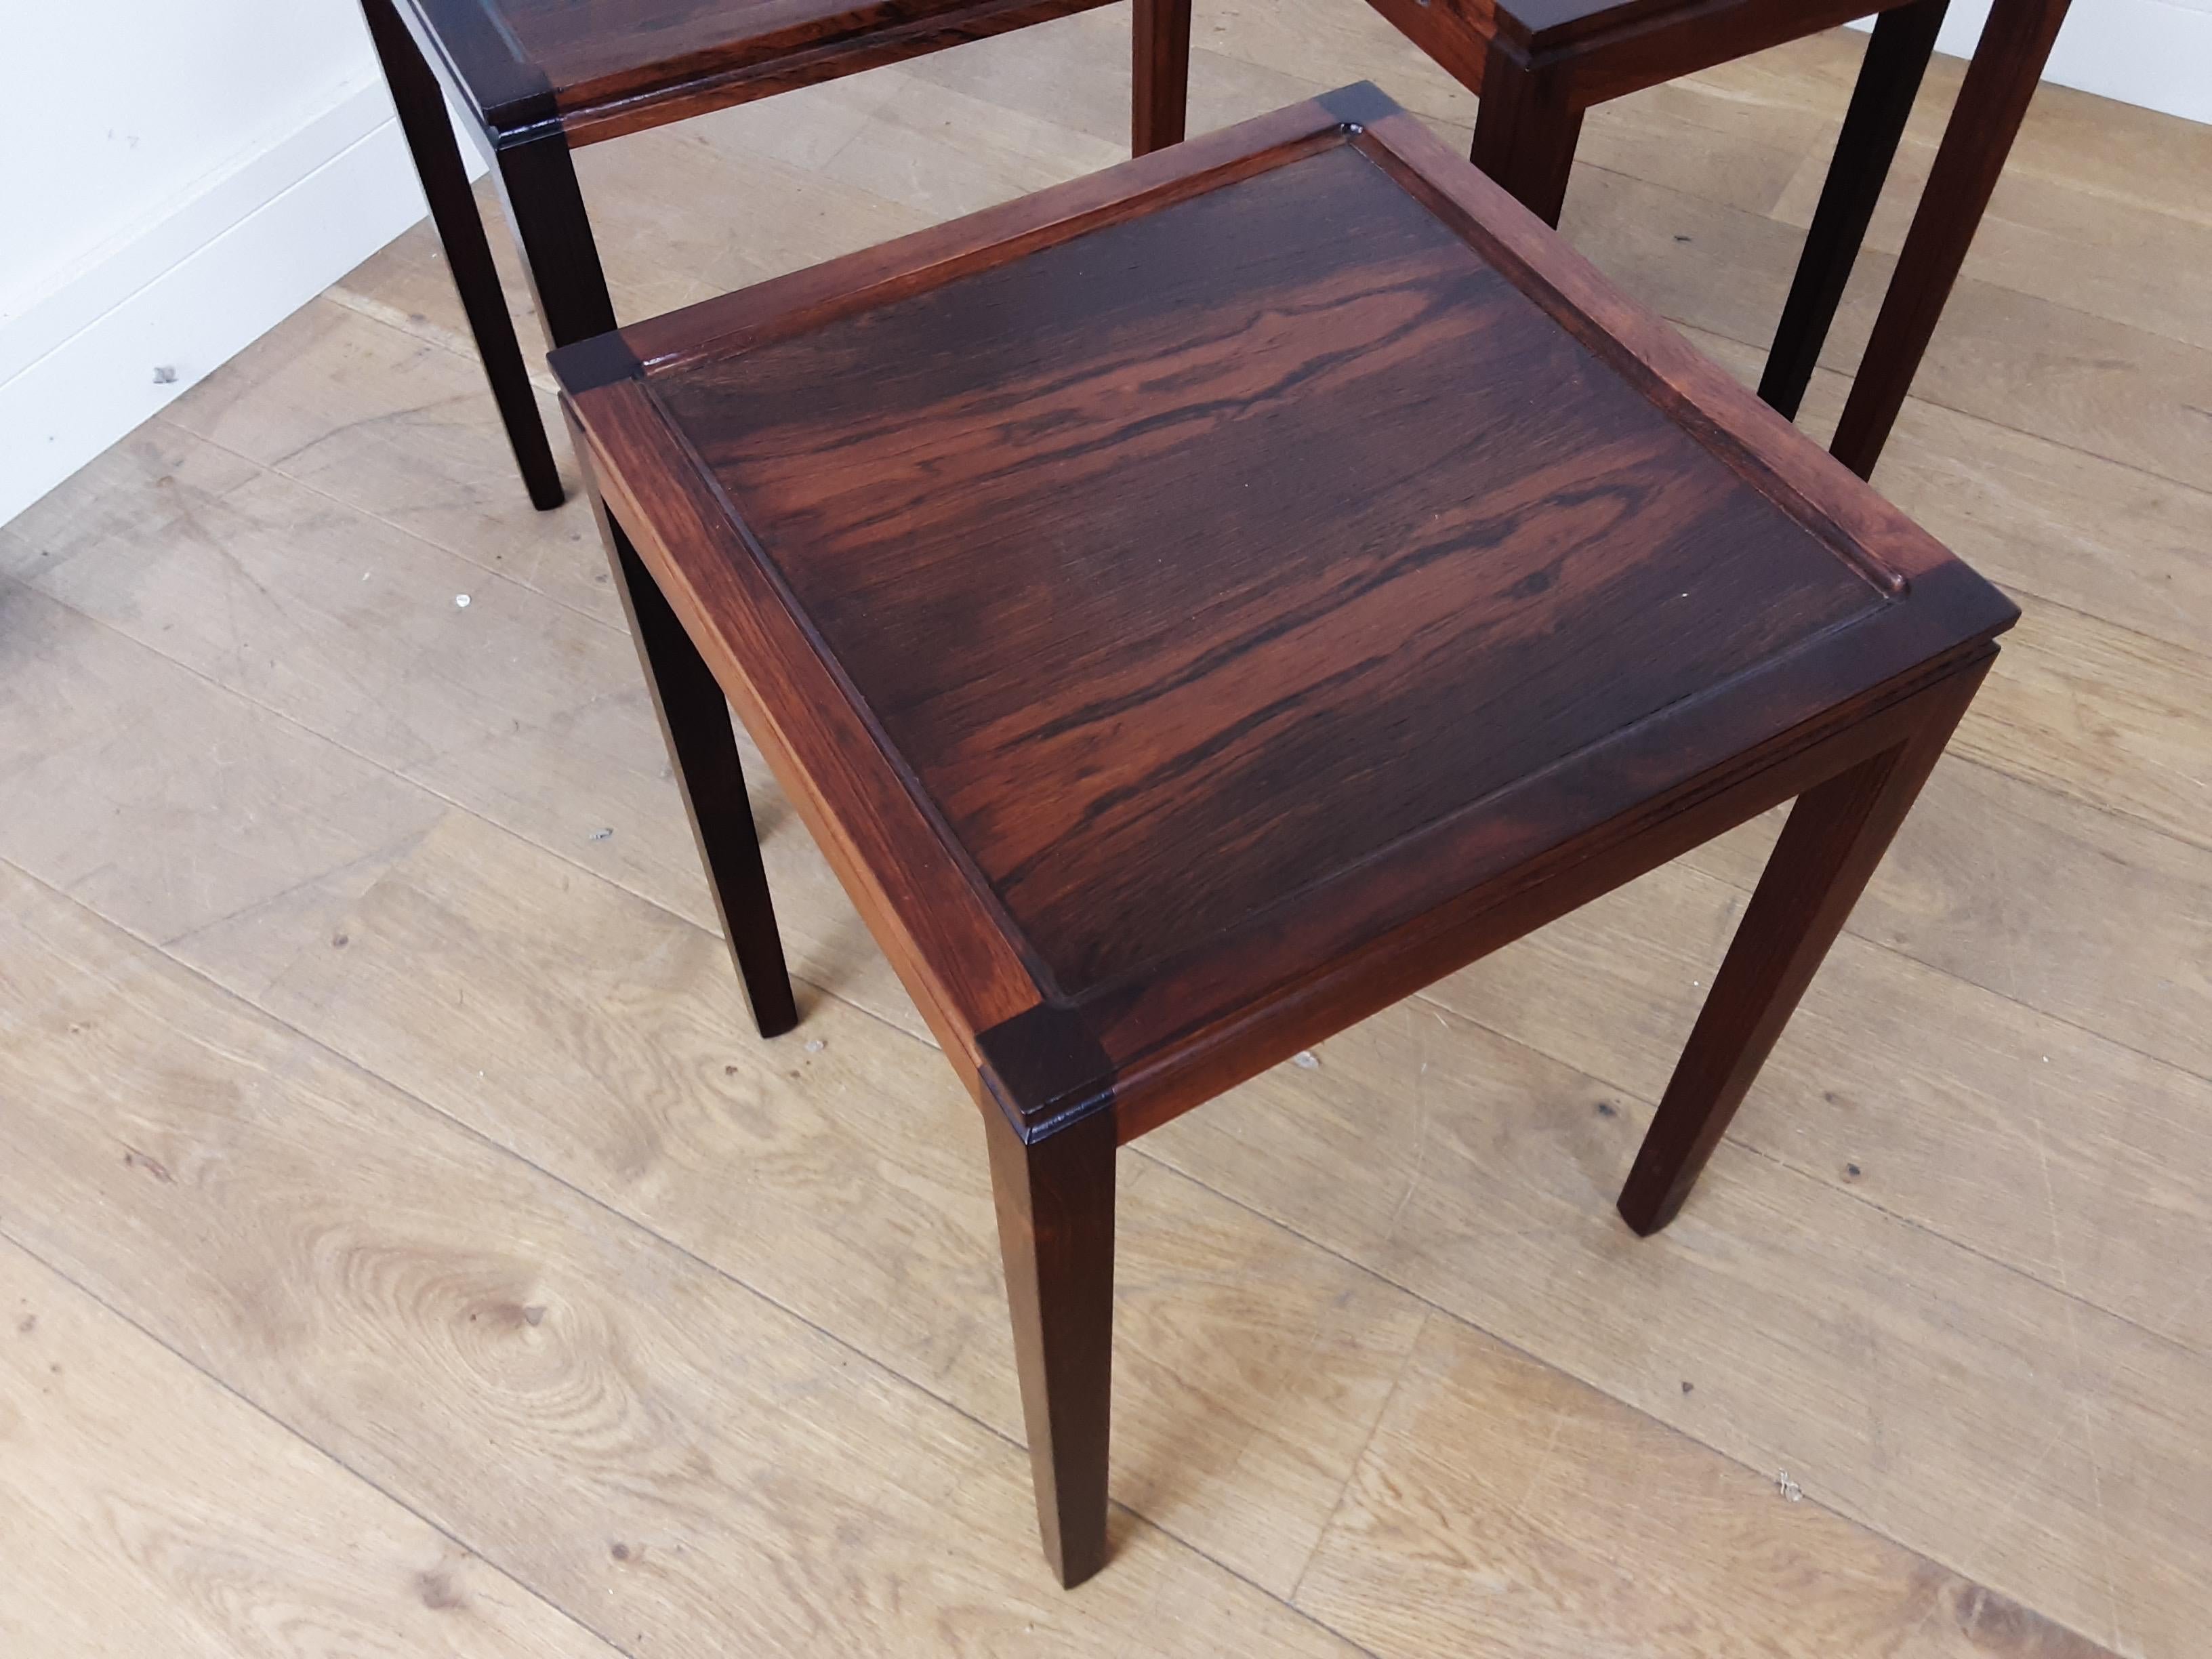 Midcentury Nest of Tables in Deep Brown Figured Rosewood circa 1960 from Denmark For Sale 2